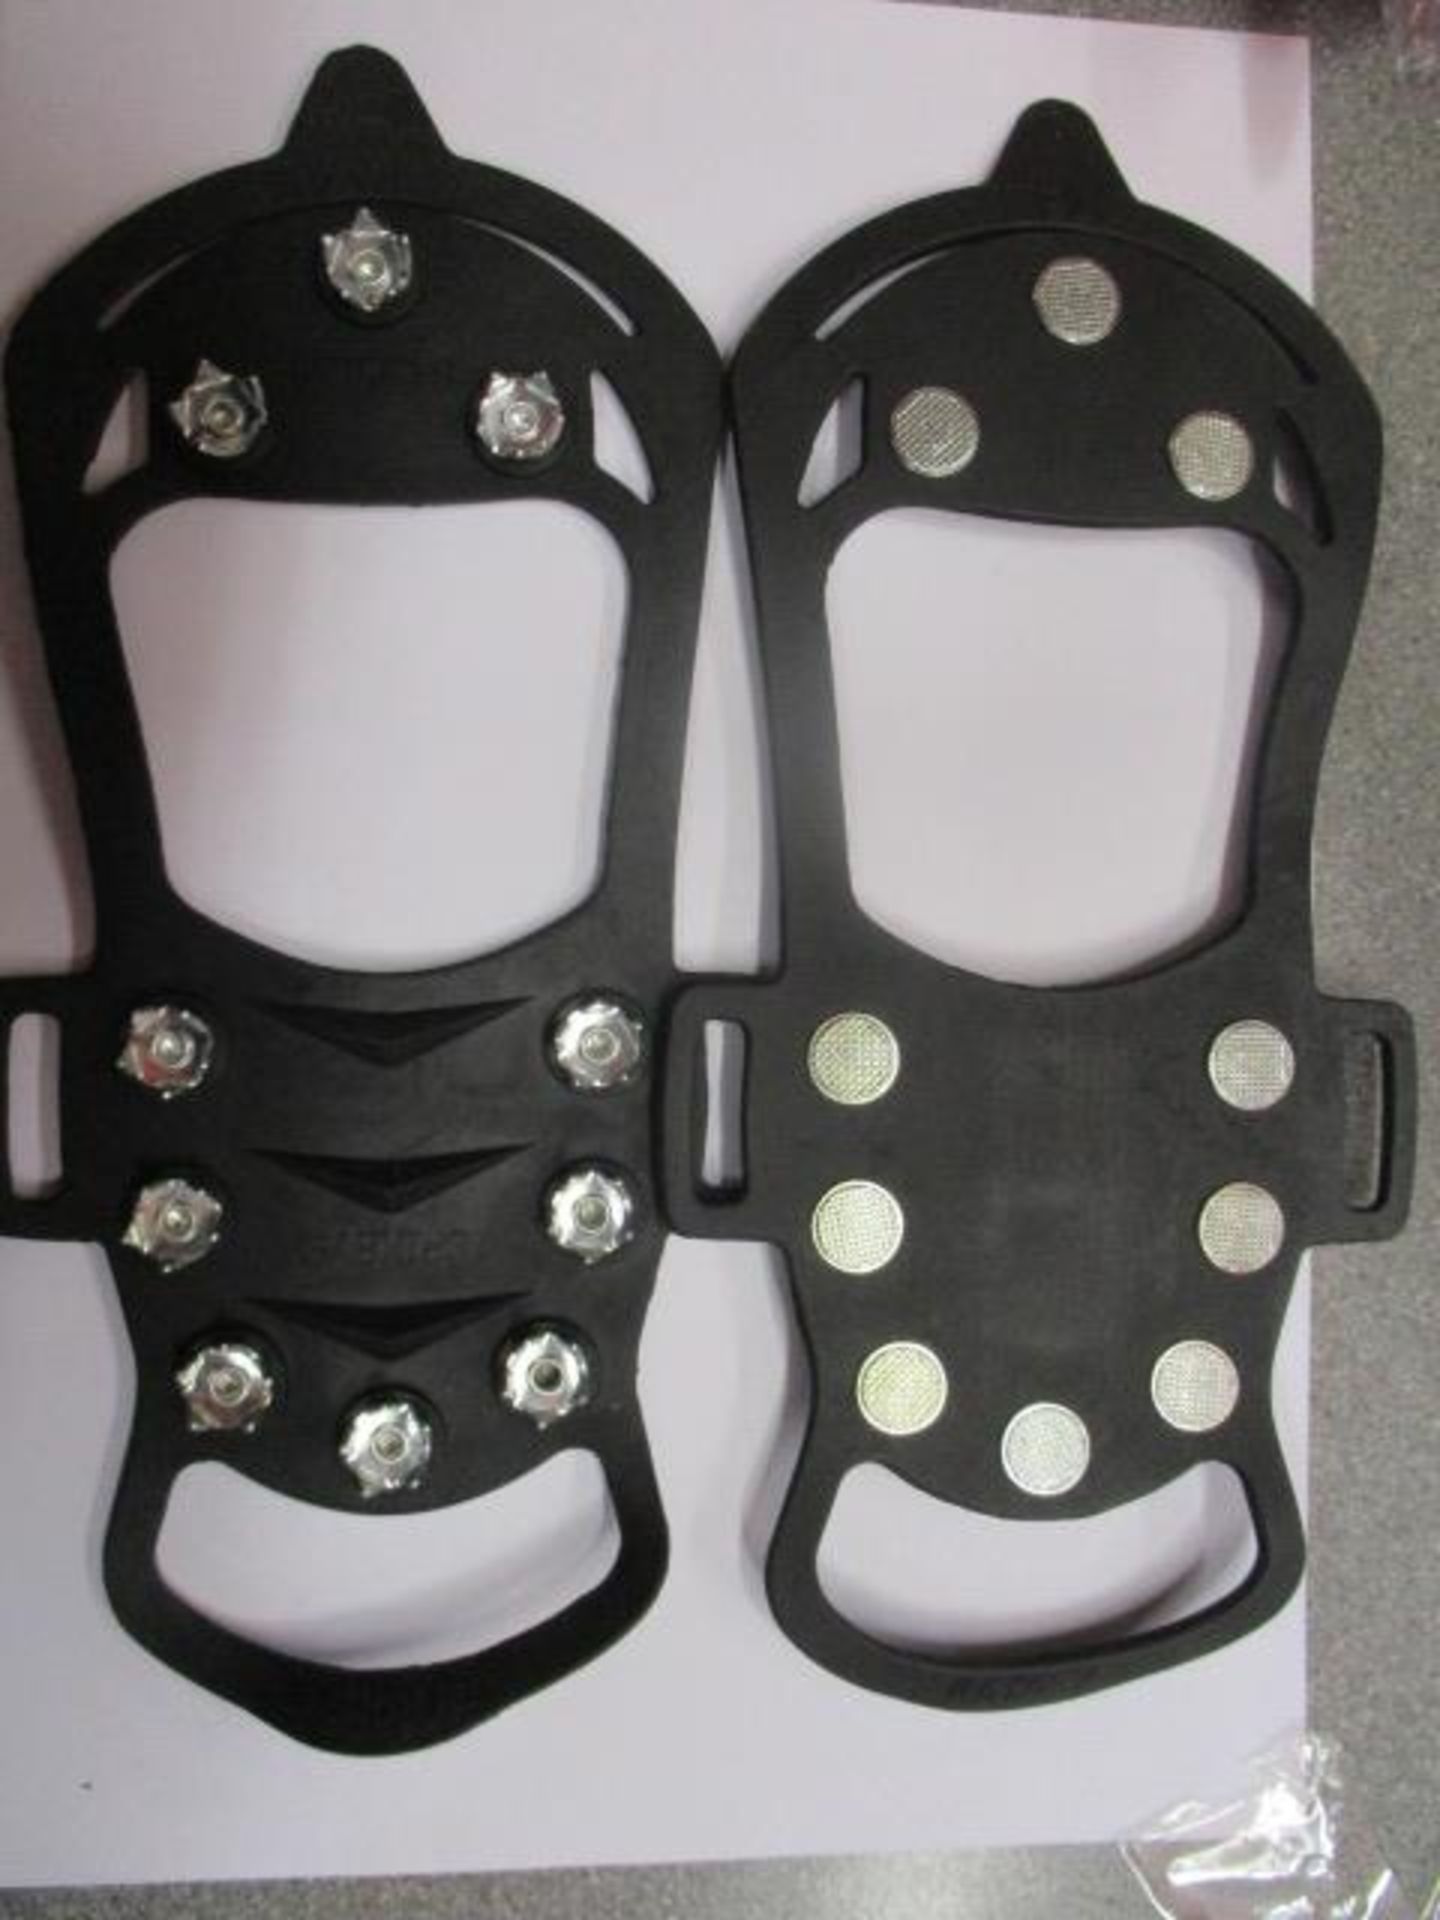 1000.pcs serious traction ice grippers with stainless steel pleets, rigid construction, german made - Image 2 of 2